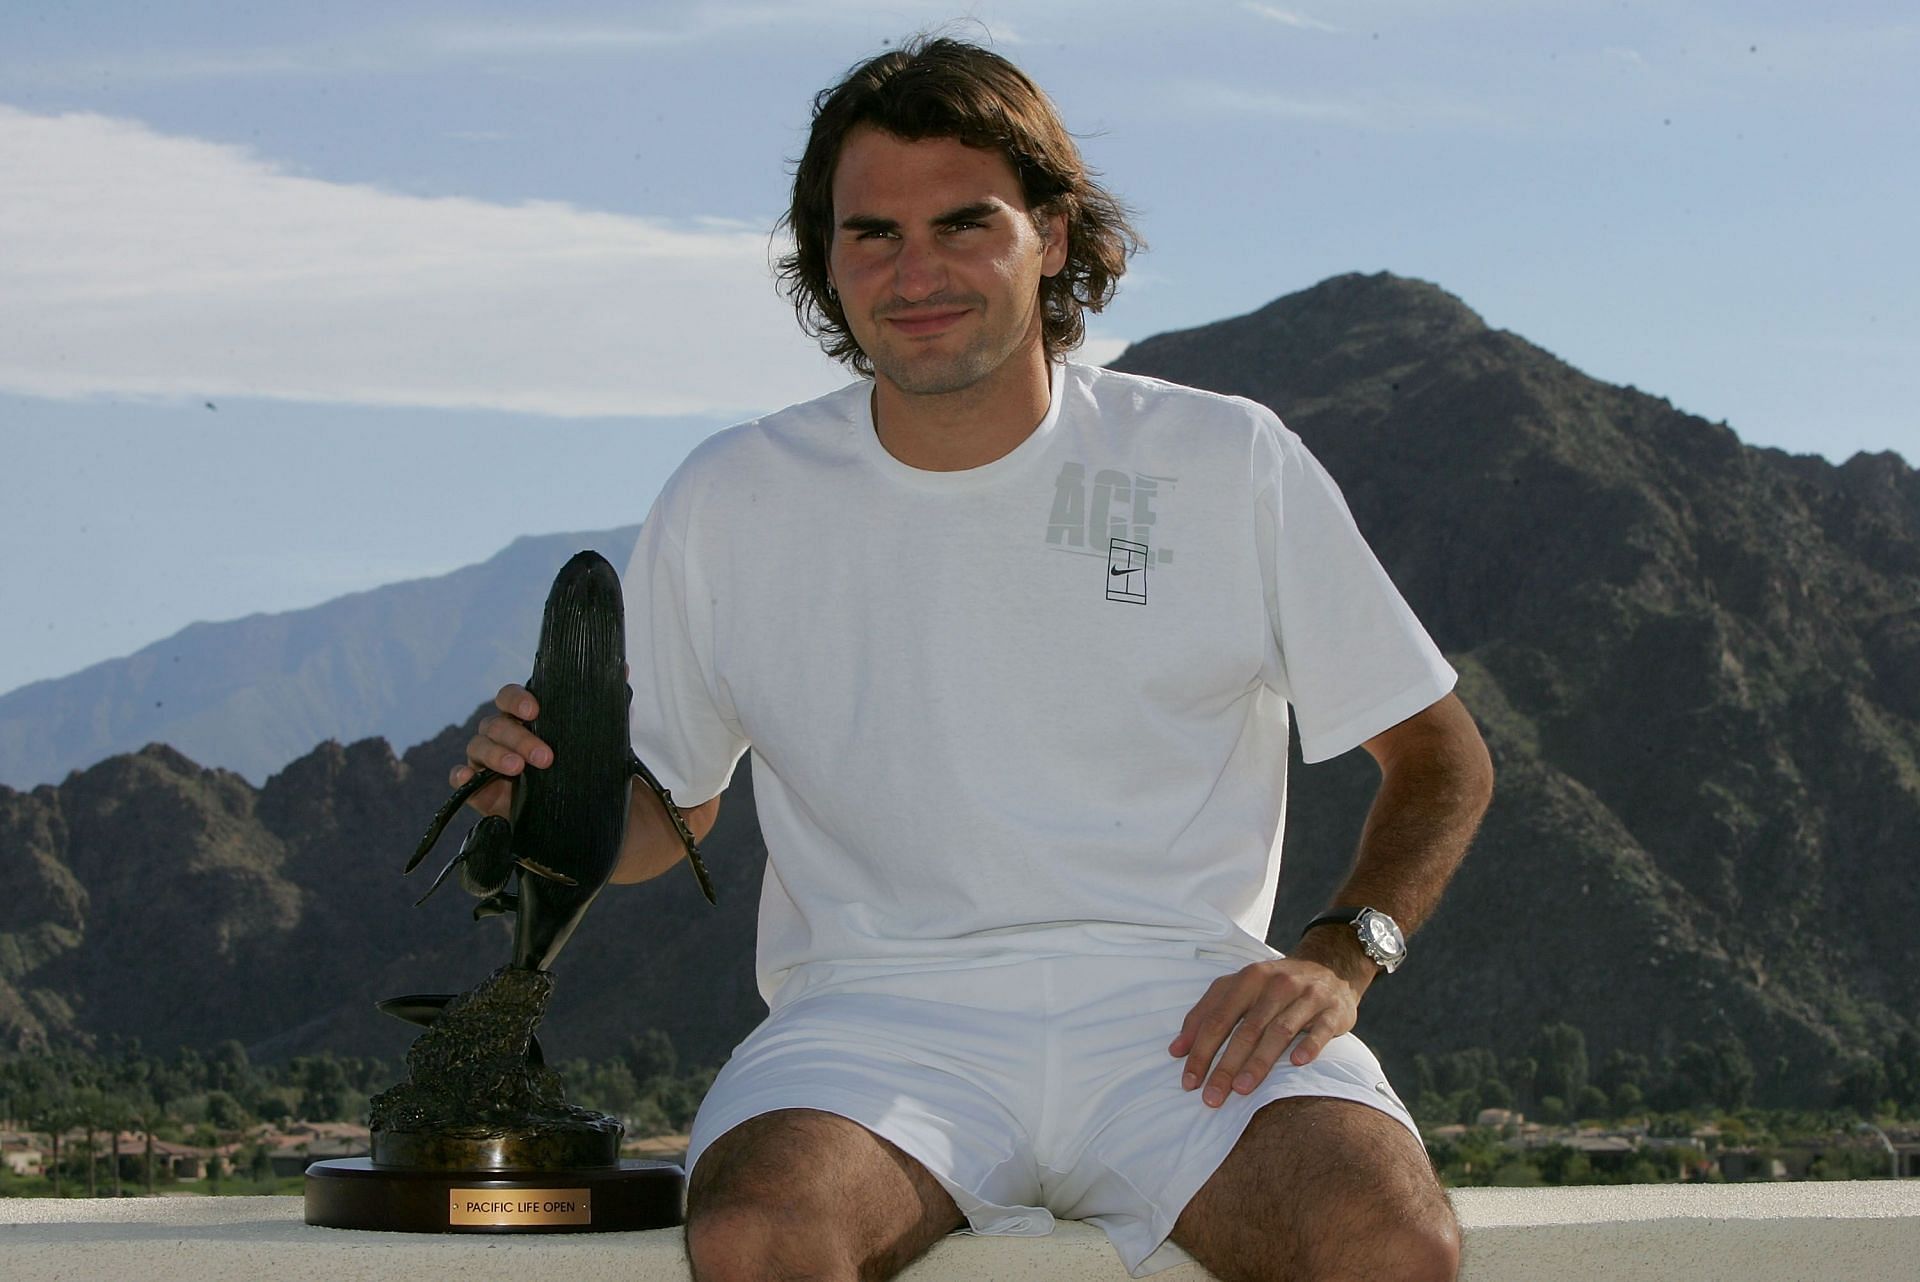 Roger Federer went on to defeat Lleyton Hewitt in straight sets for his second title in Indian Wells